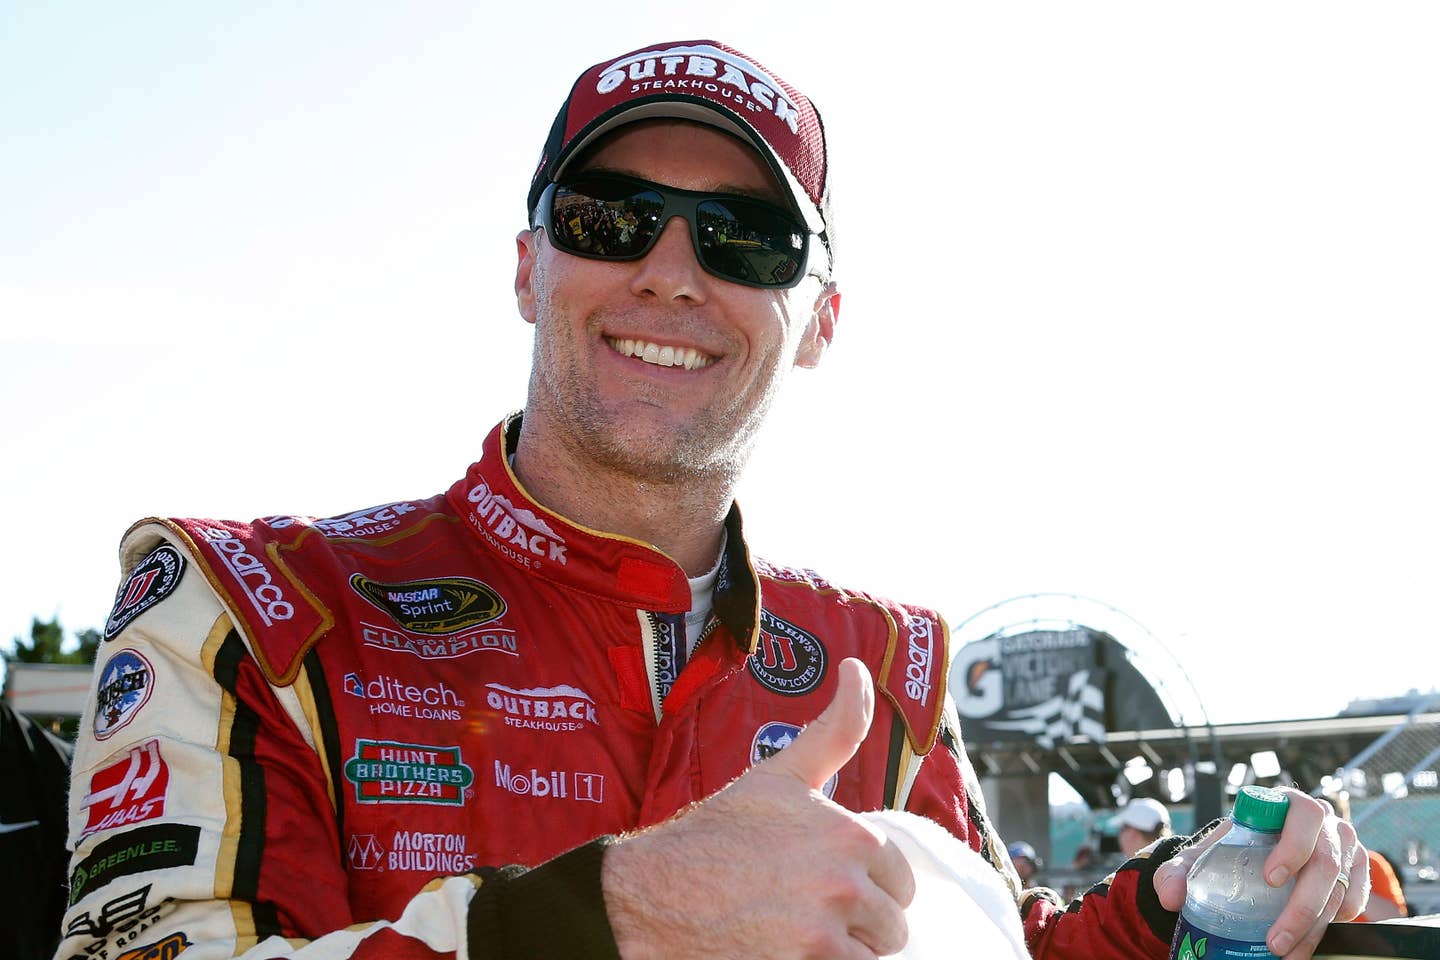 Harvick’s On the Pole for the NASCAR Sprint Cup Finale